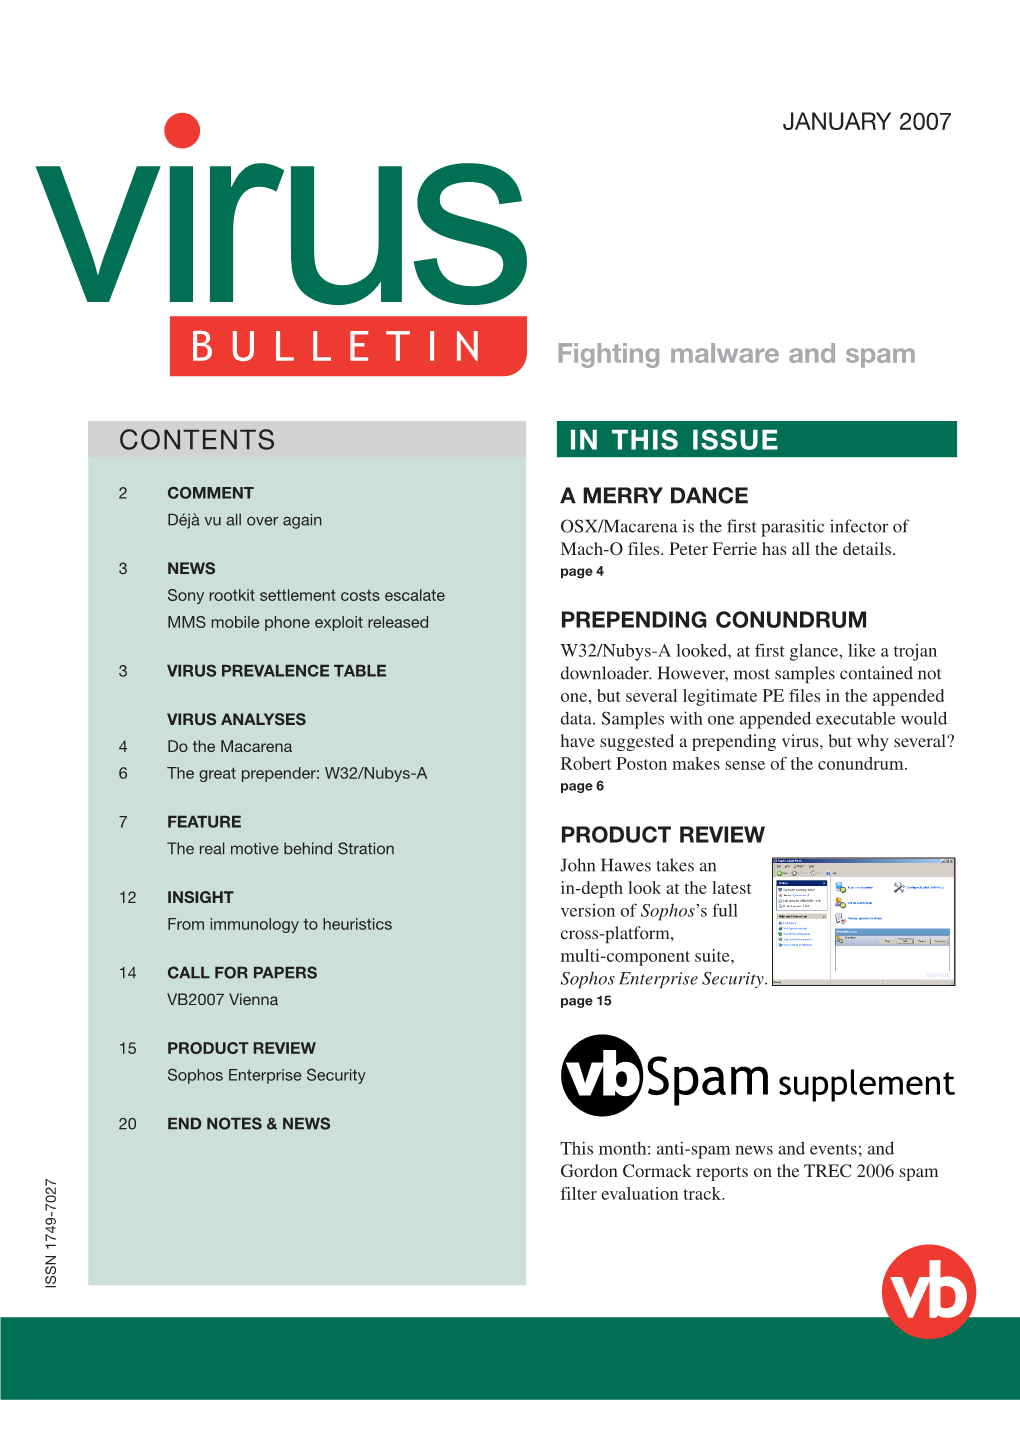 Fighting Malware and Spam CONTENTS in THIS ISSUE